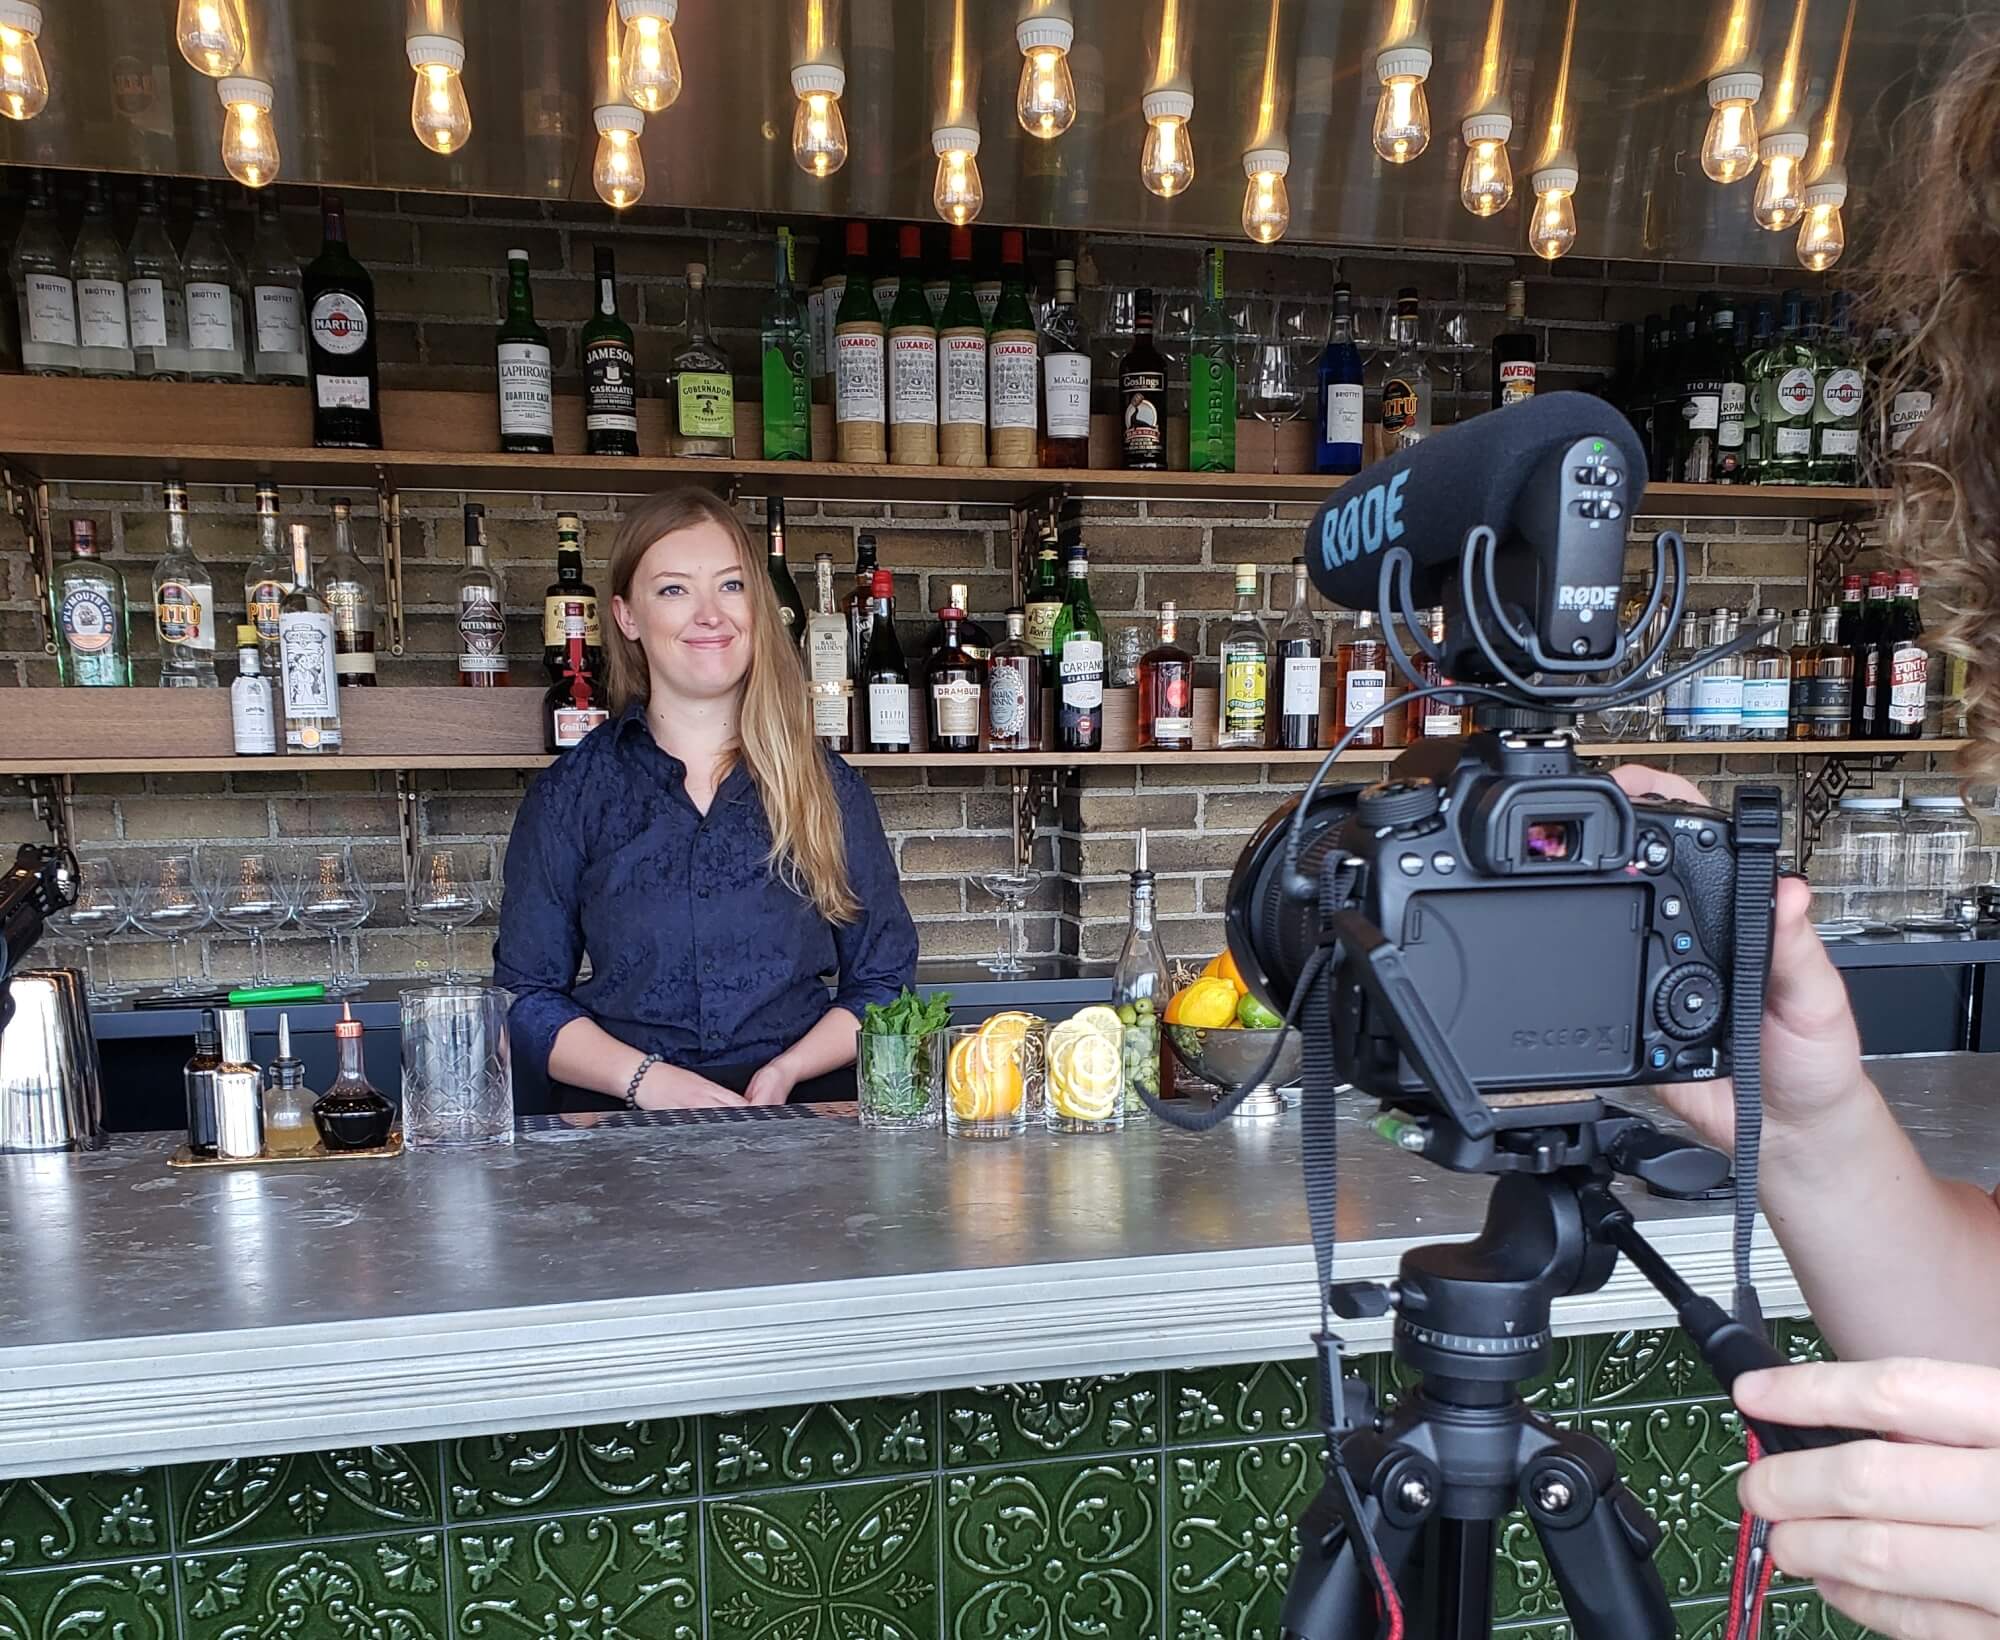 A women wearing a blue shirt stands behind a cocktail bar, smiling at a camera in the foreground of the image.